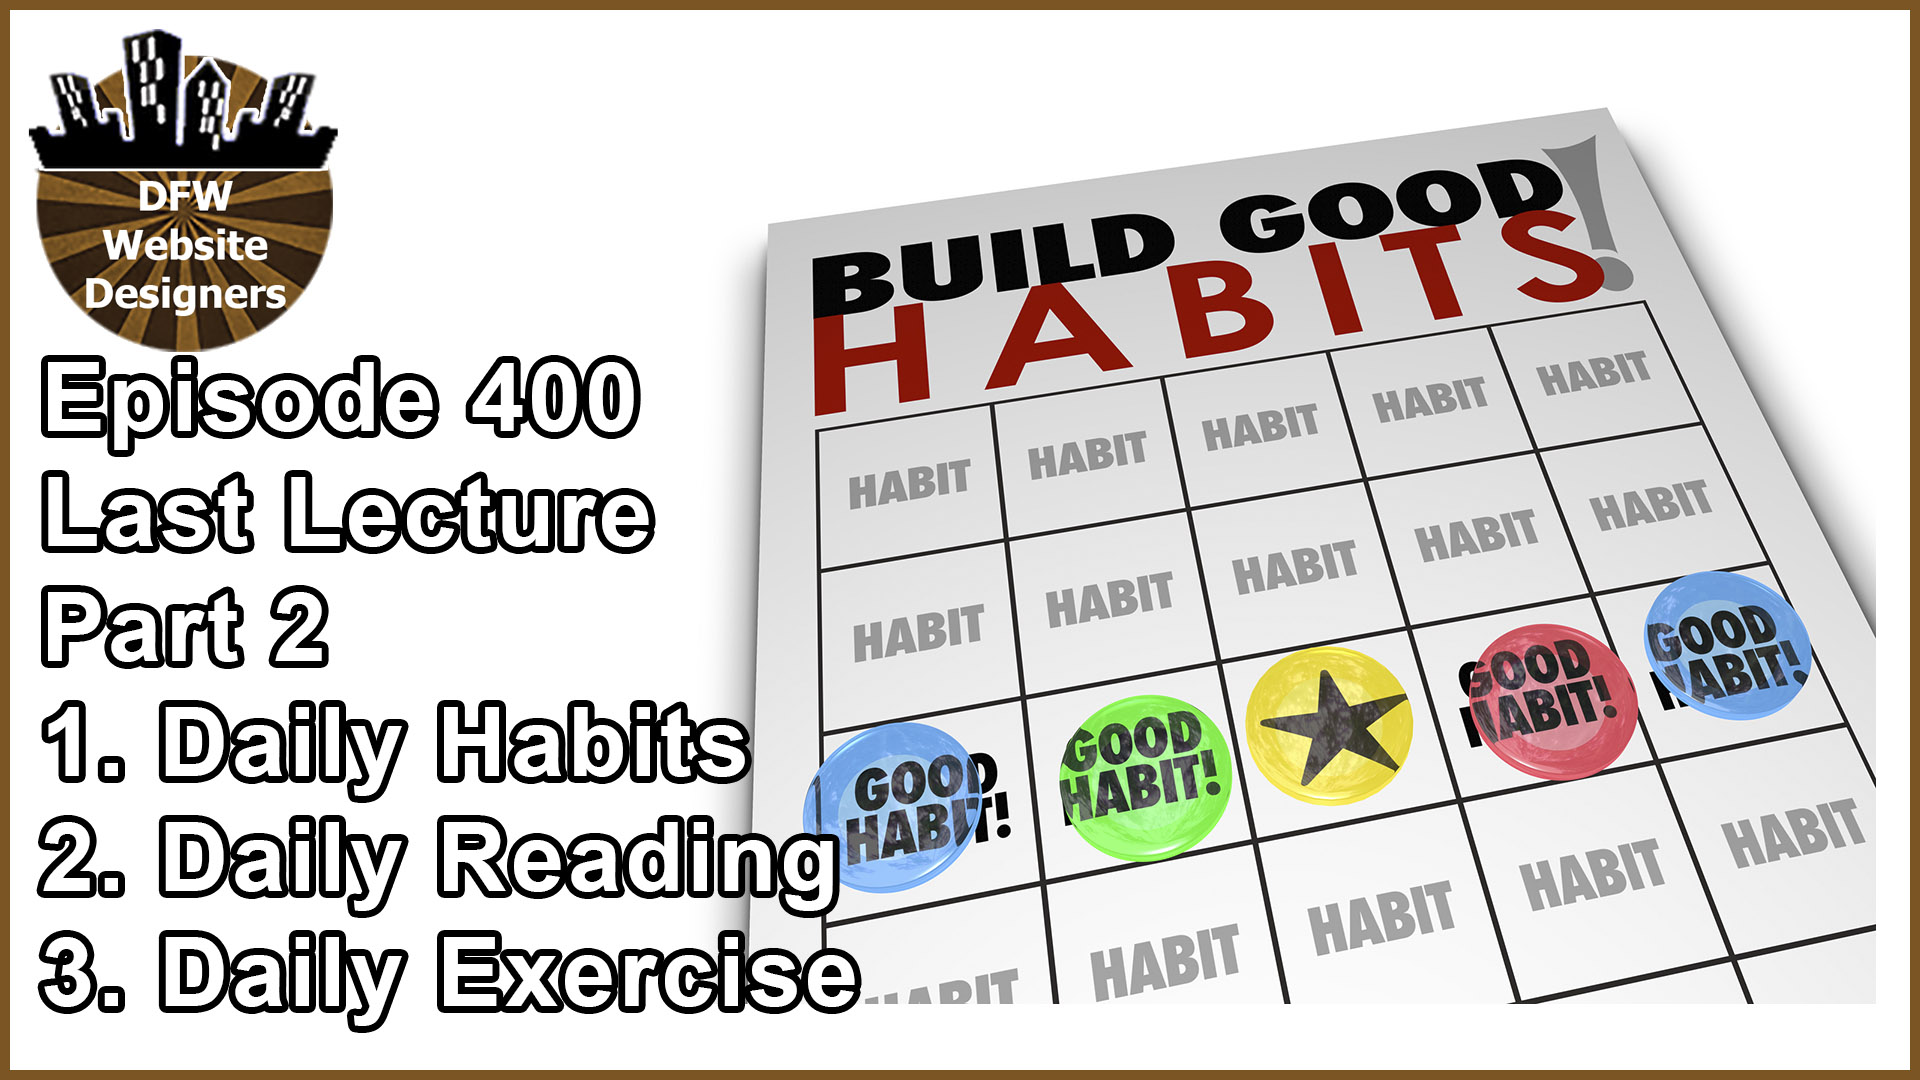 Episode 400 Last Lecture Series Pt2: Daily Habits, Reading, Exercise